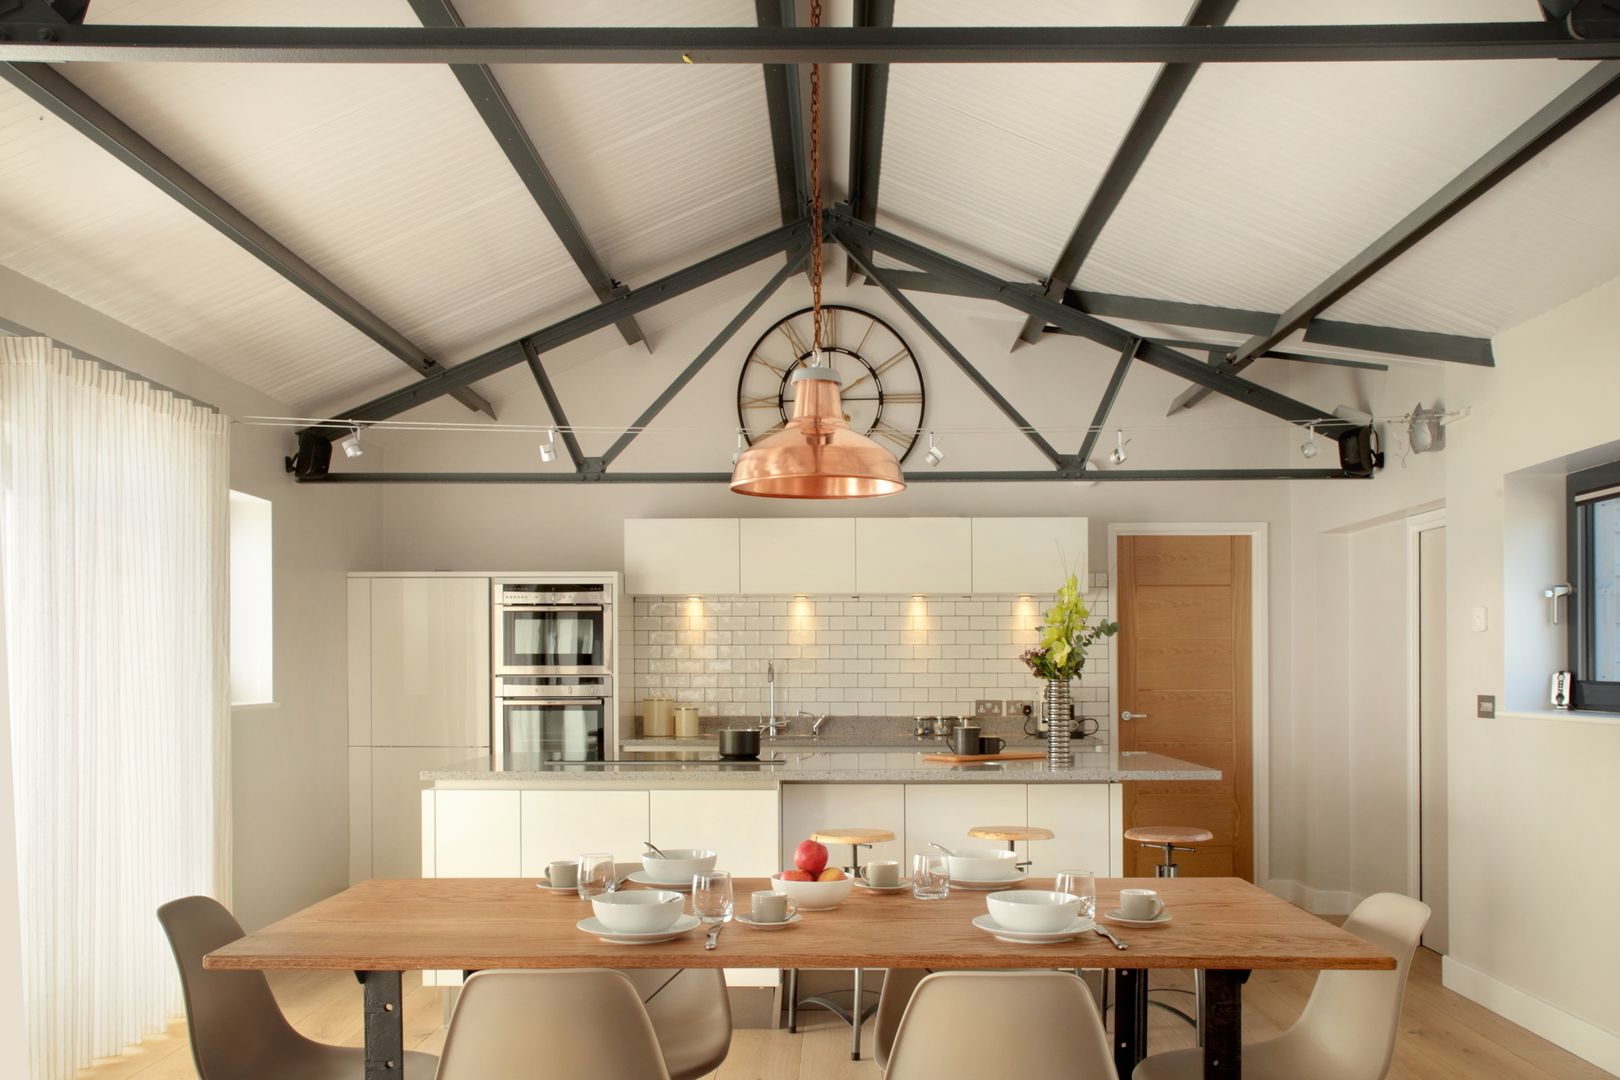 The Cow Shed Barn Conversion Kitchen in-toto Kitchens Design Studio Marlow Cozinhas clássicas